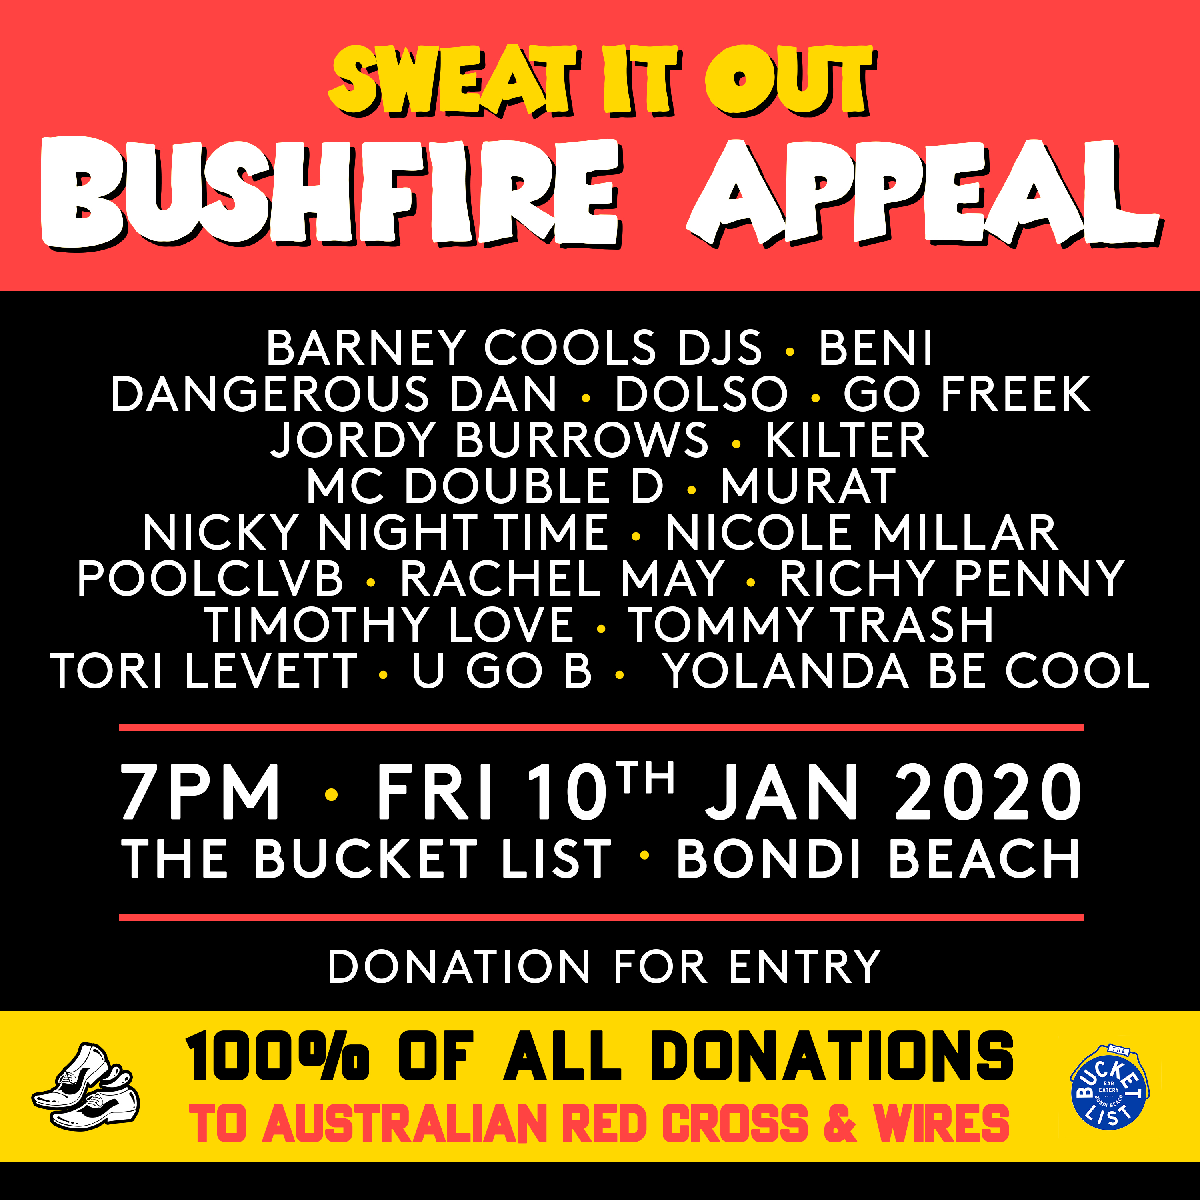 SWEAT IT OUT ANNOUNCE BUSHFIRE APPEAL GIG AT BUCKET LIST, SYDNEY ON FRIDAY JAN 10